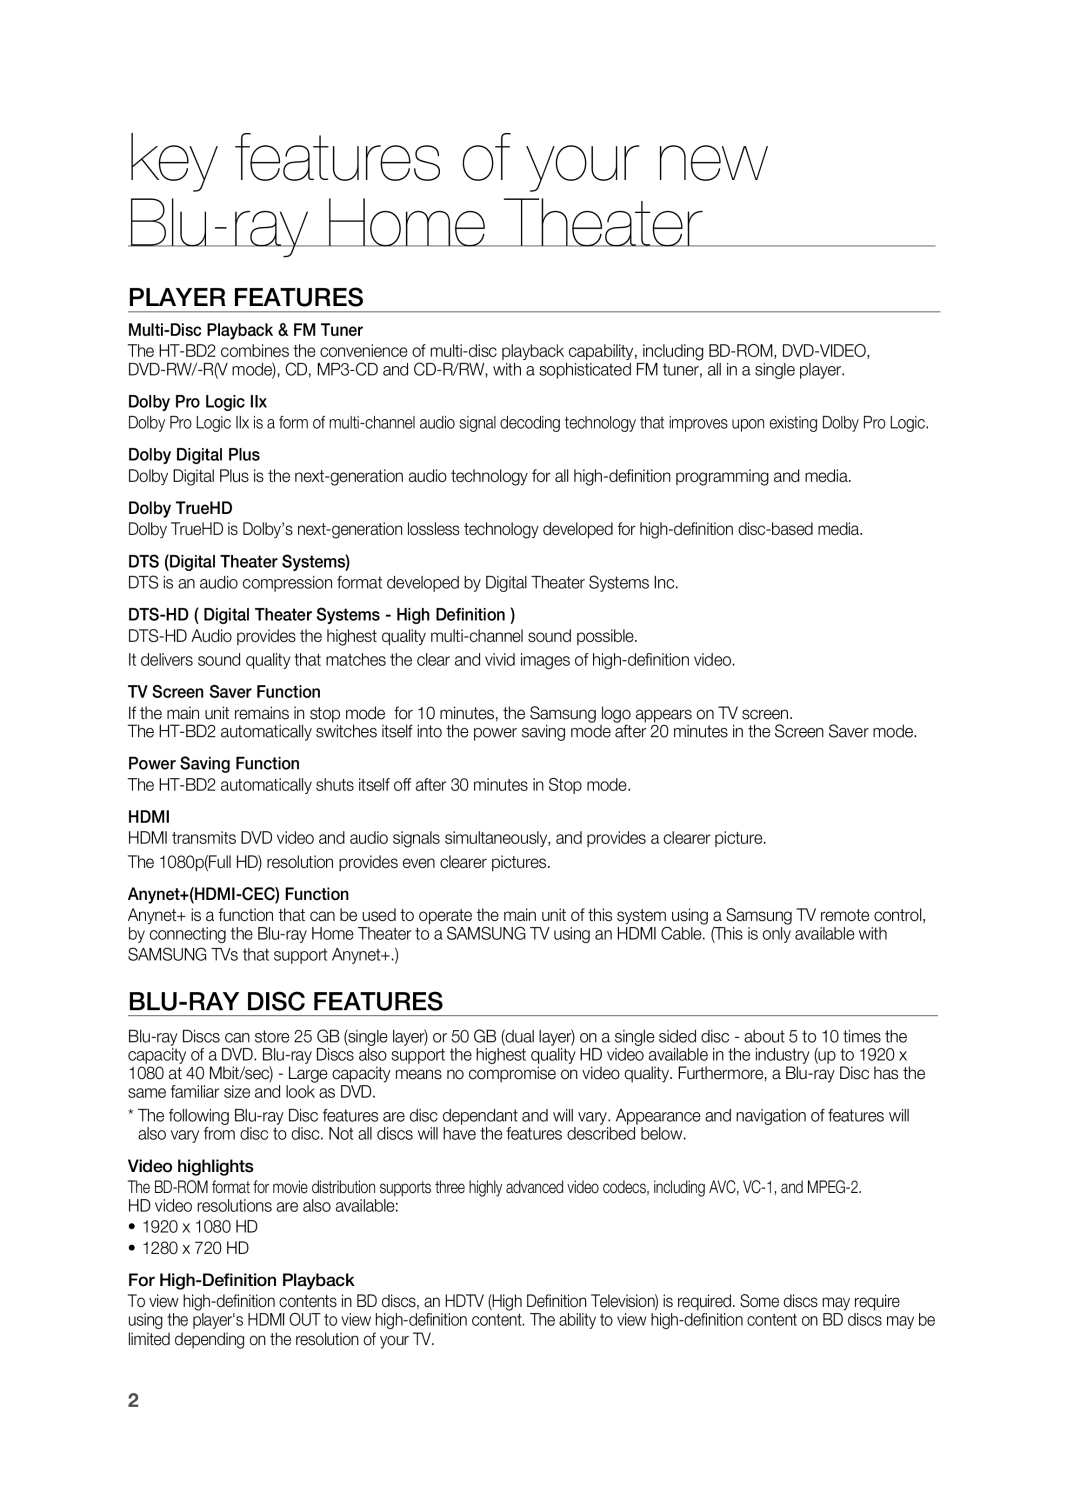 Samsung HT-BD2 manual key features of your new Blu-rayHome Theater, Player Features, Blu-Raydisc Features 